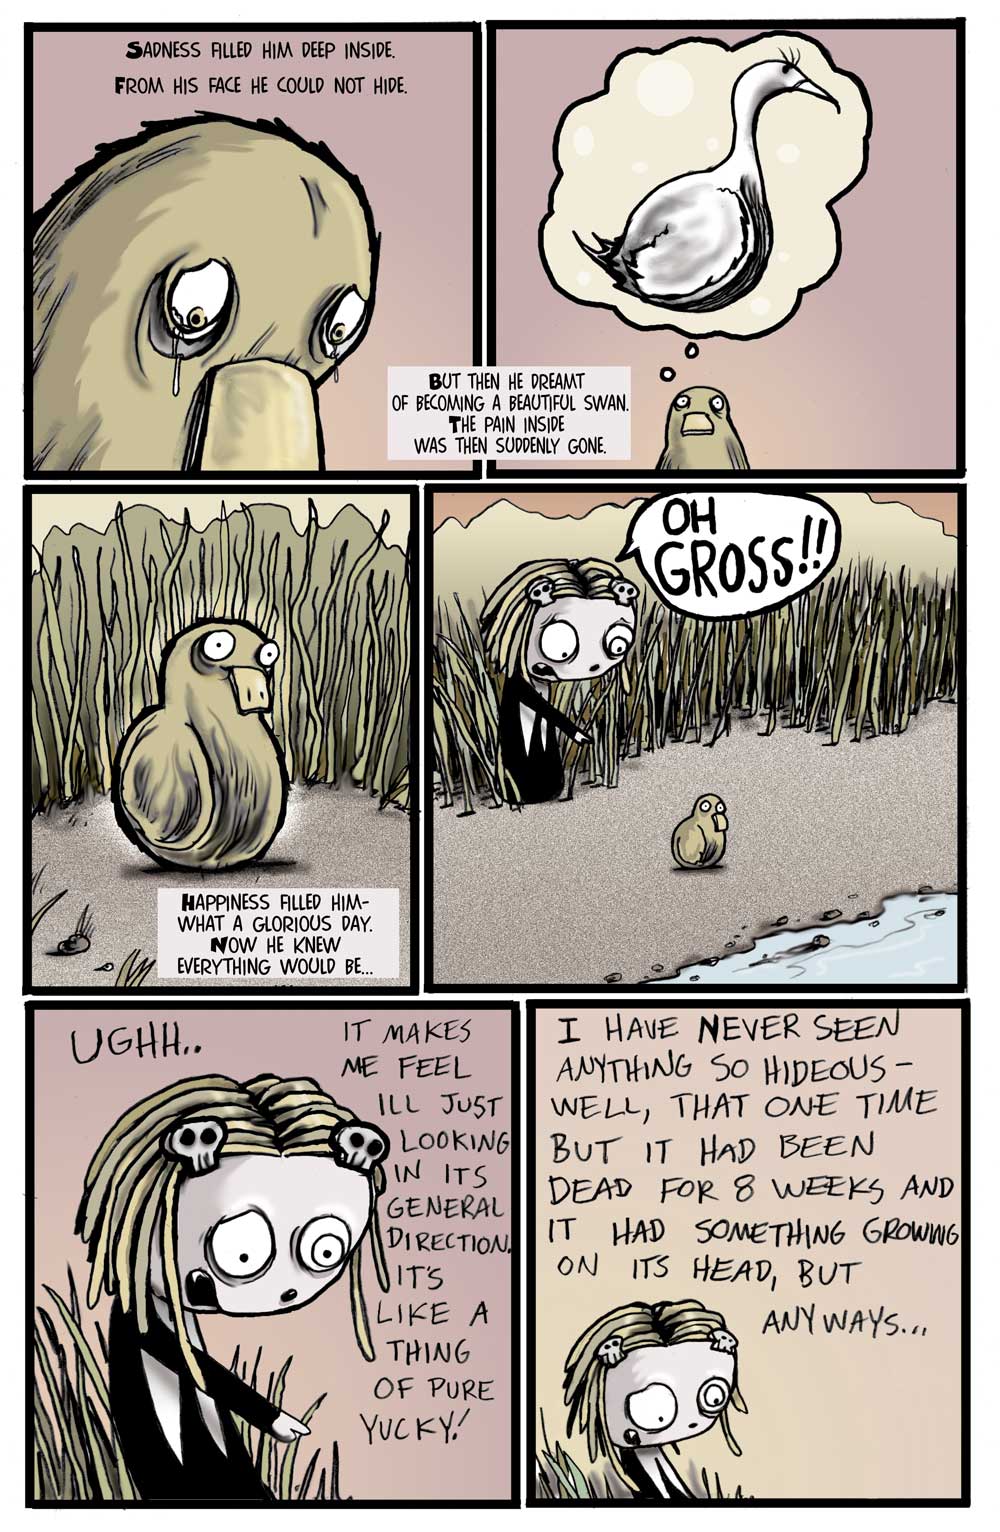 Lenore_Fugly-Duckling-Page-2